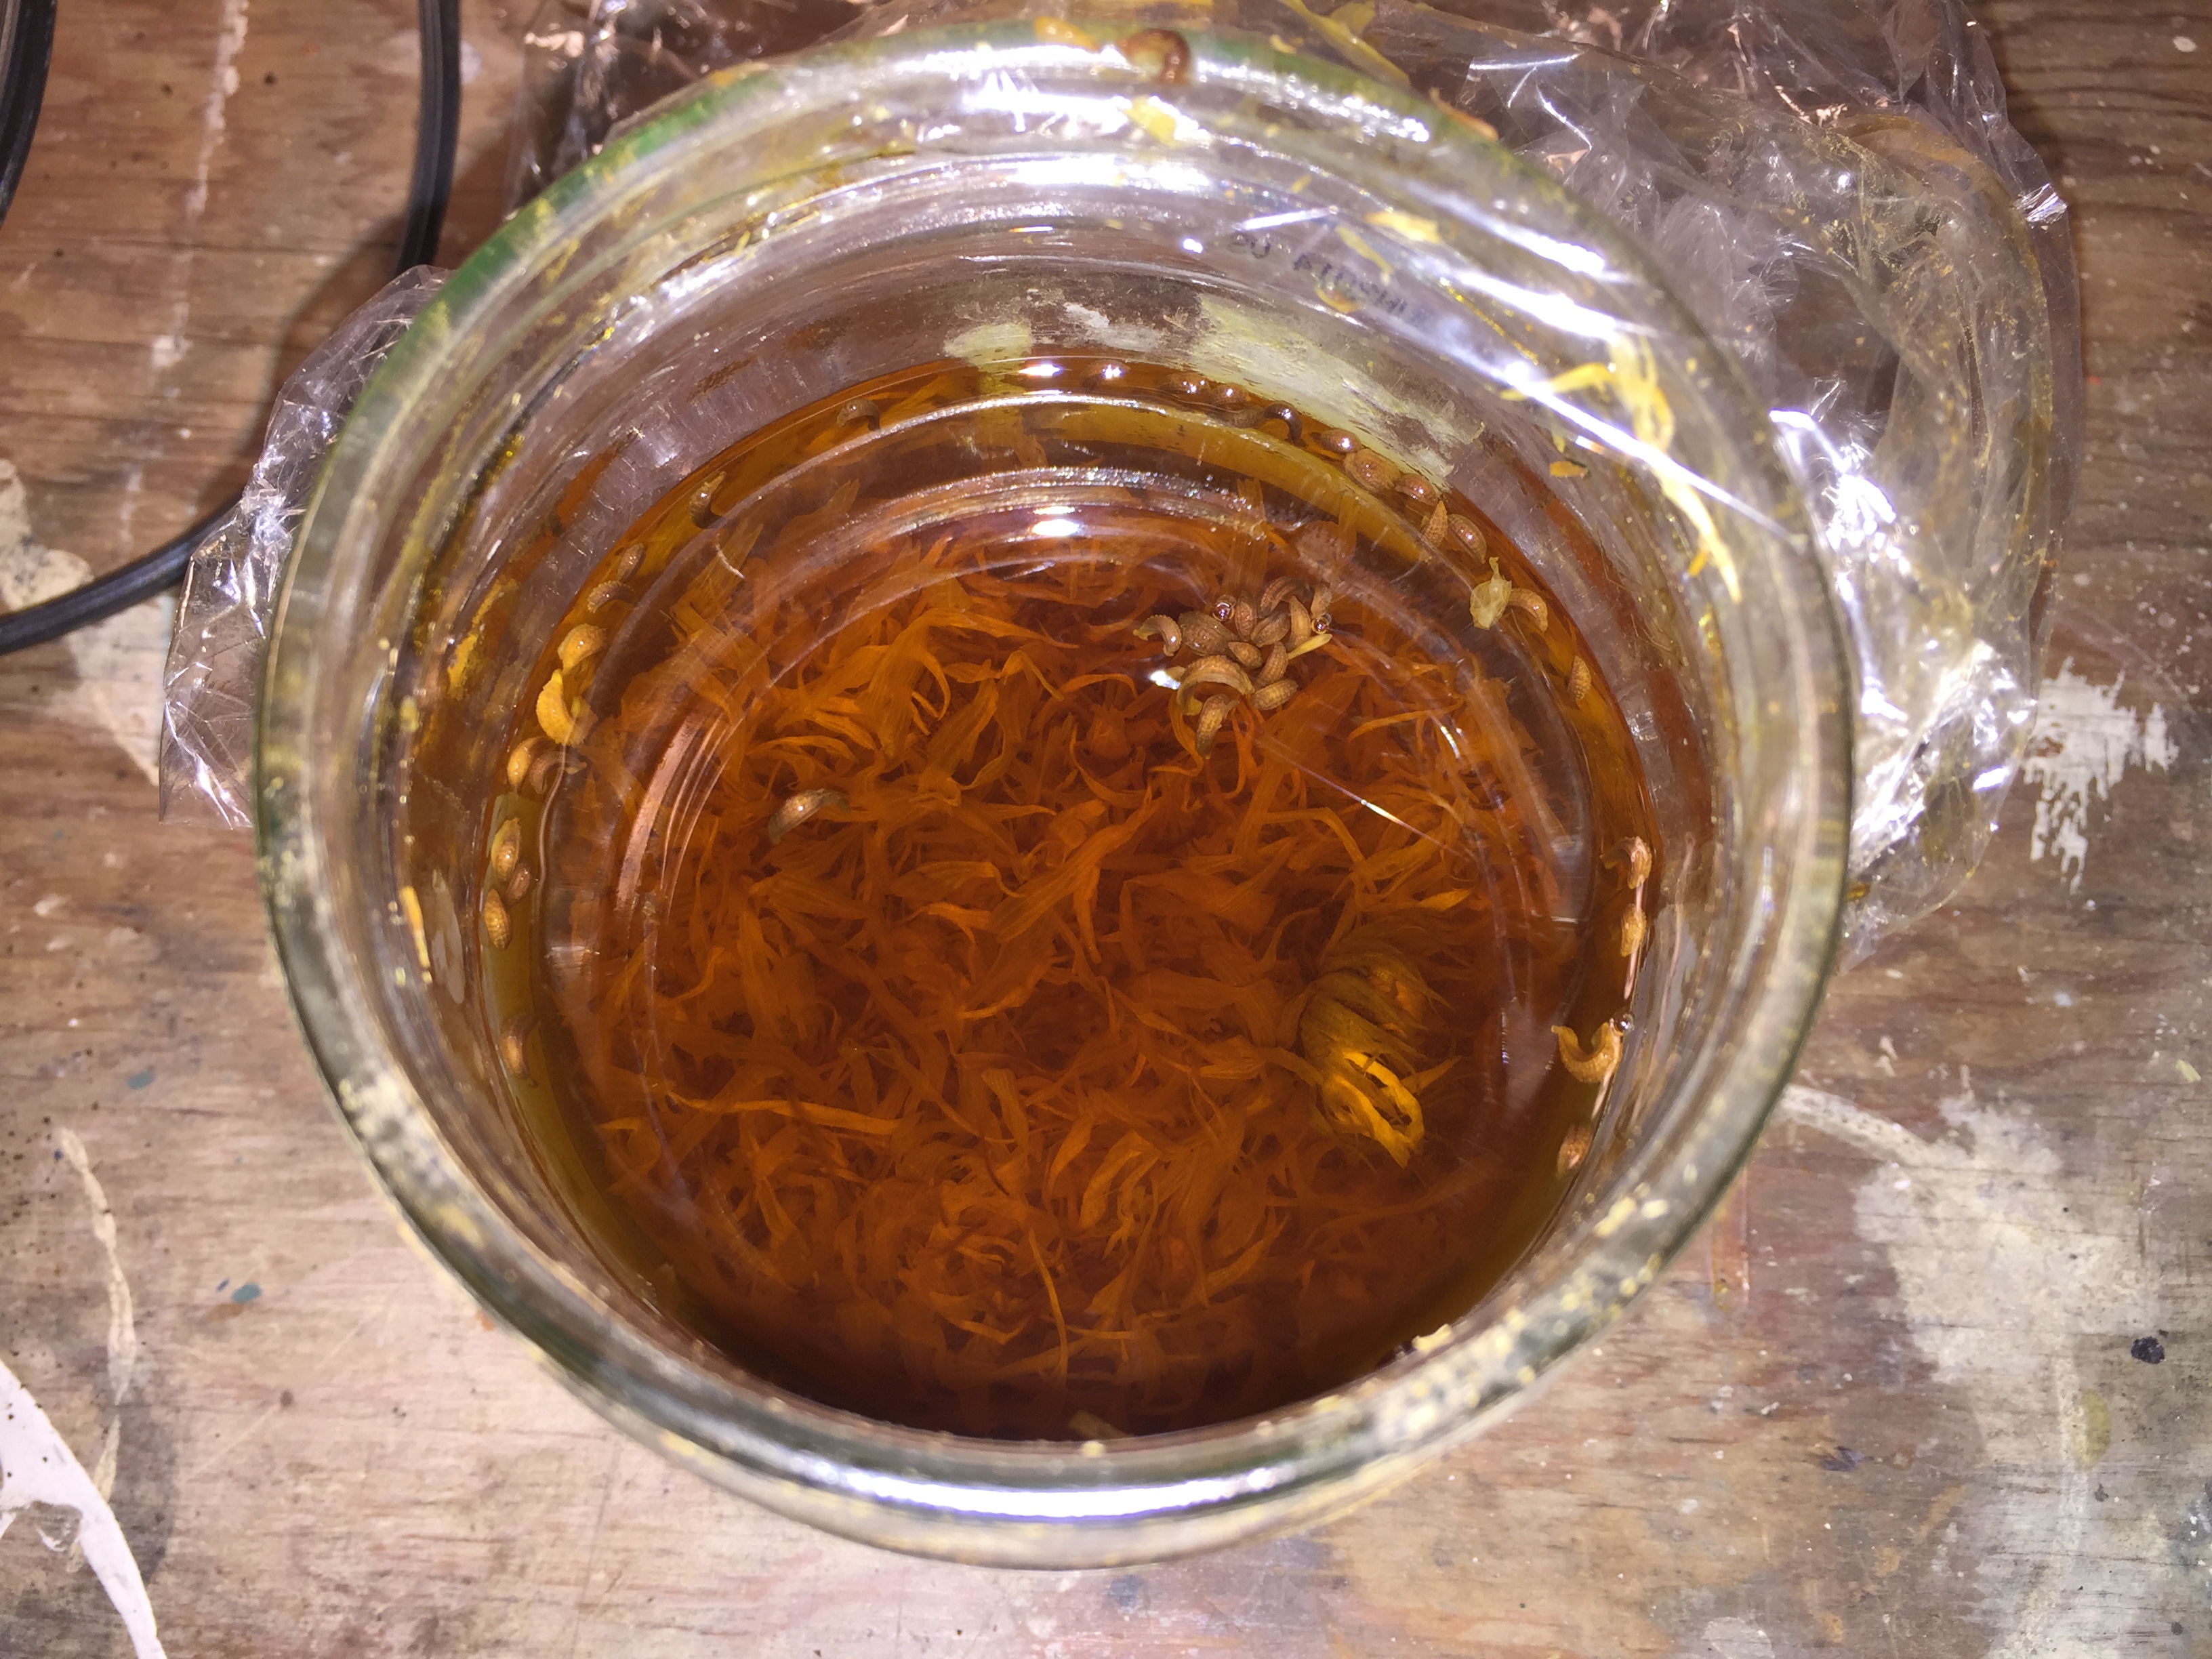 Maceration in alcohol